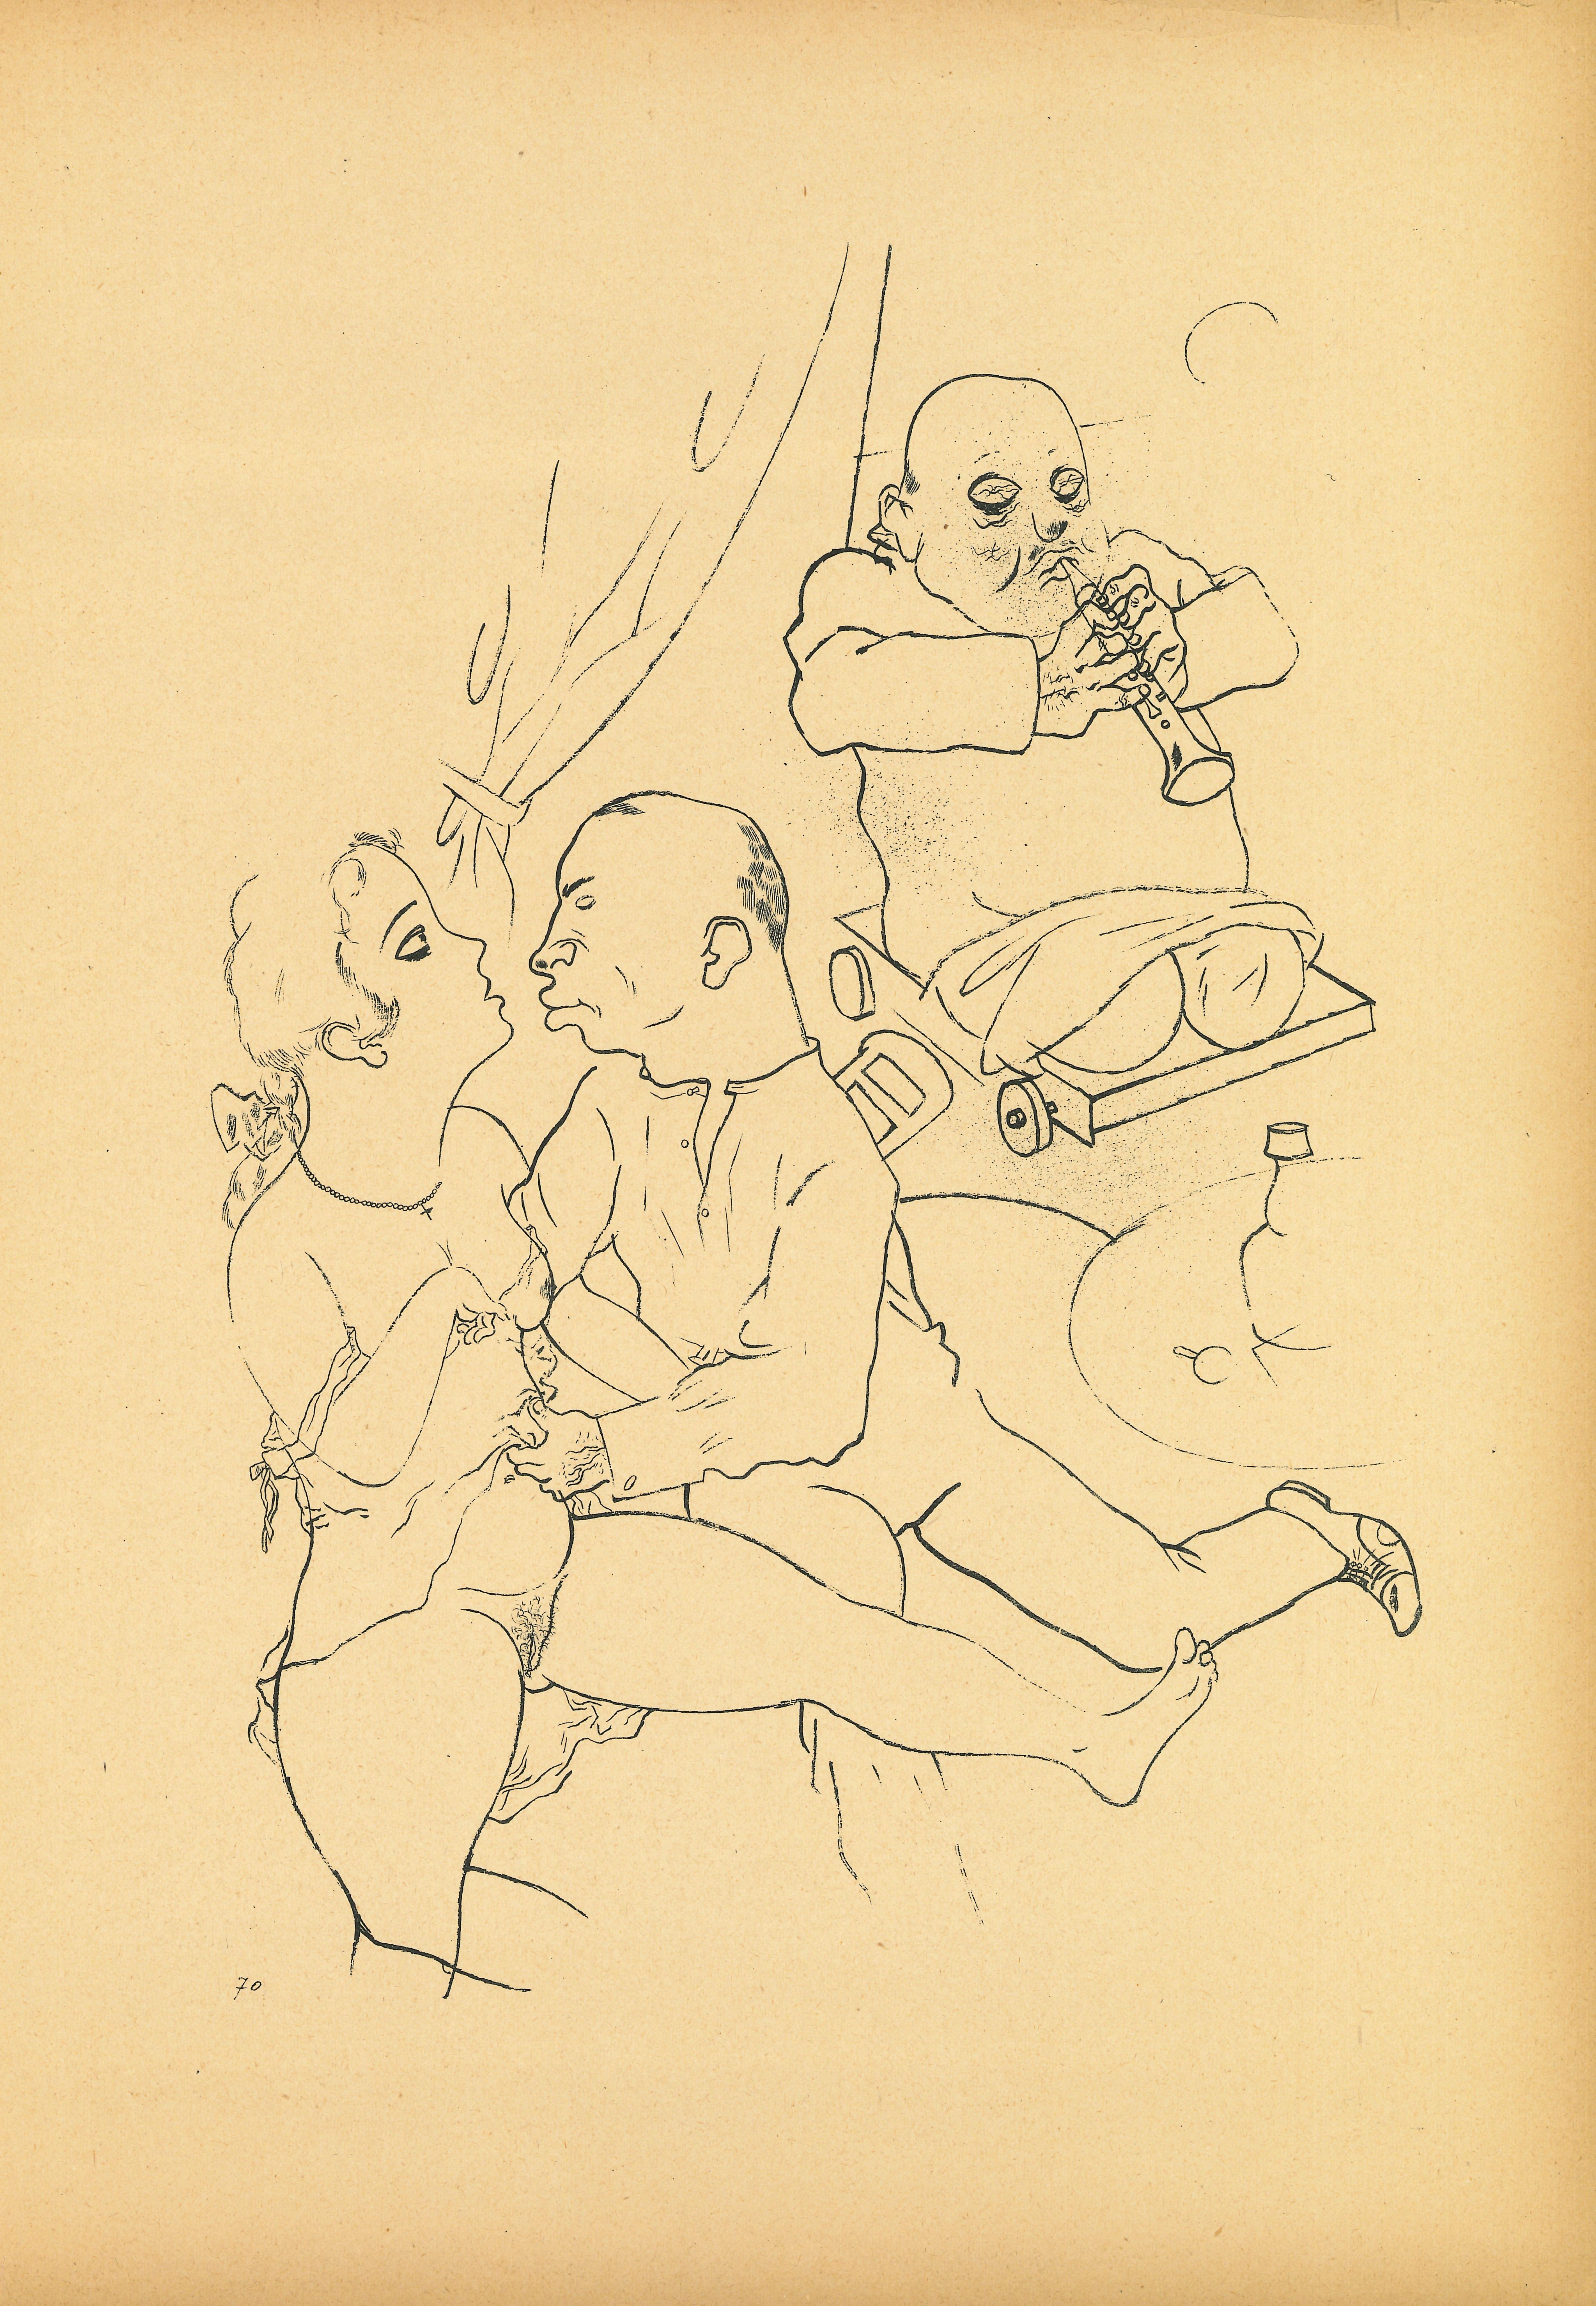 What type of artist was George Grosz?